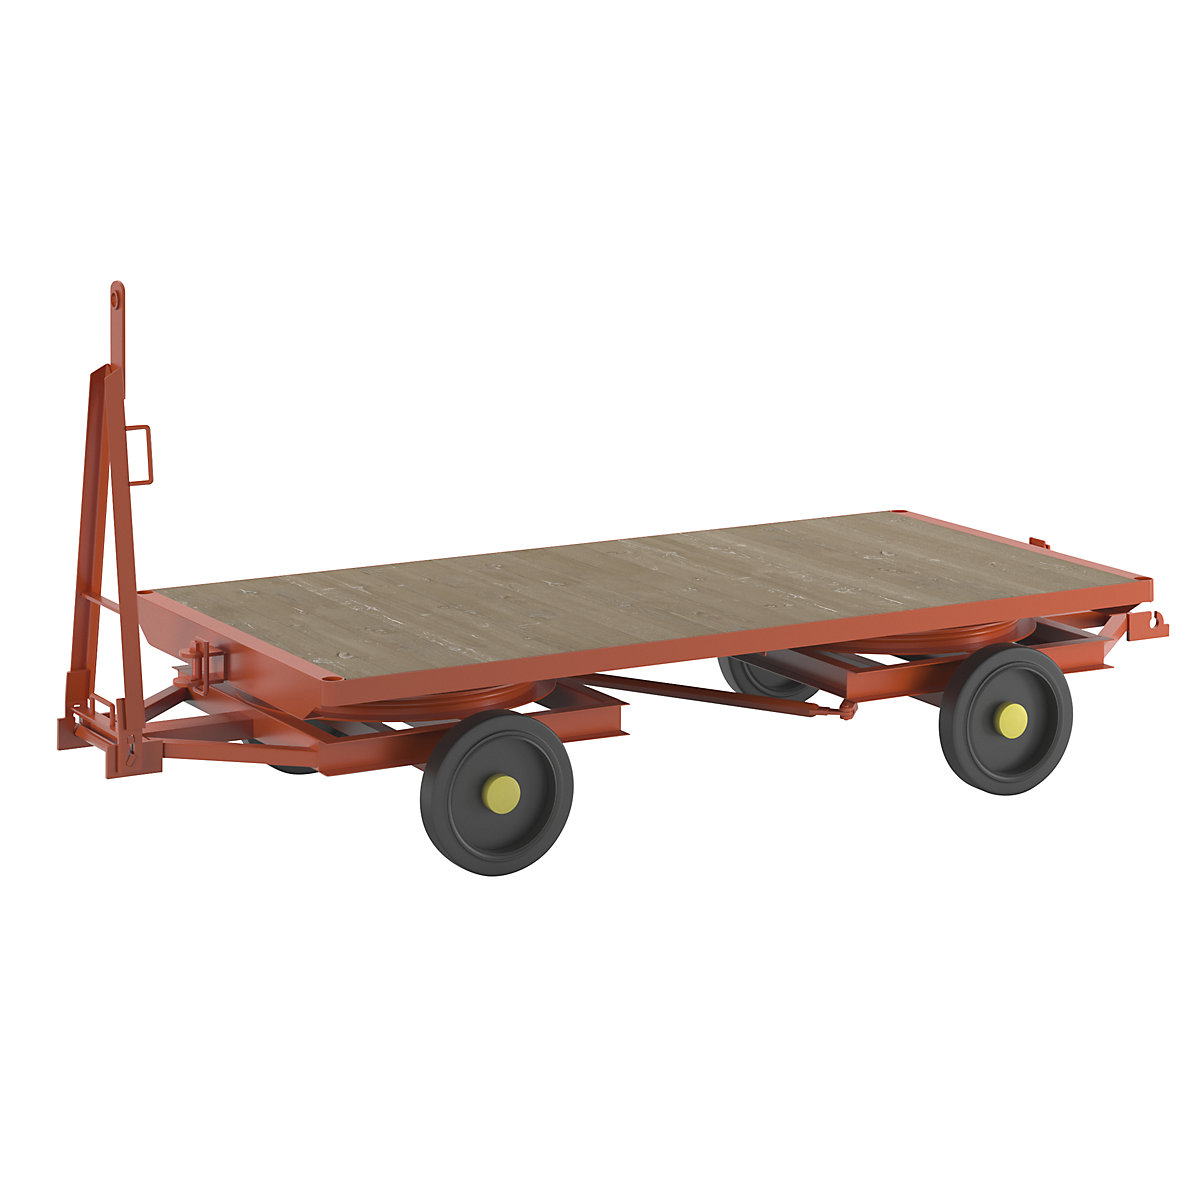 Trailer, 4-wheel double turntable steering, max. load 3 t, platform 2.5 x 1.25 m, solid rubber tyres-13